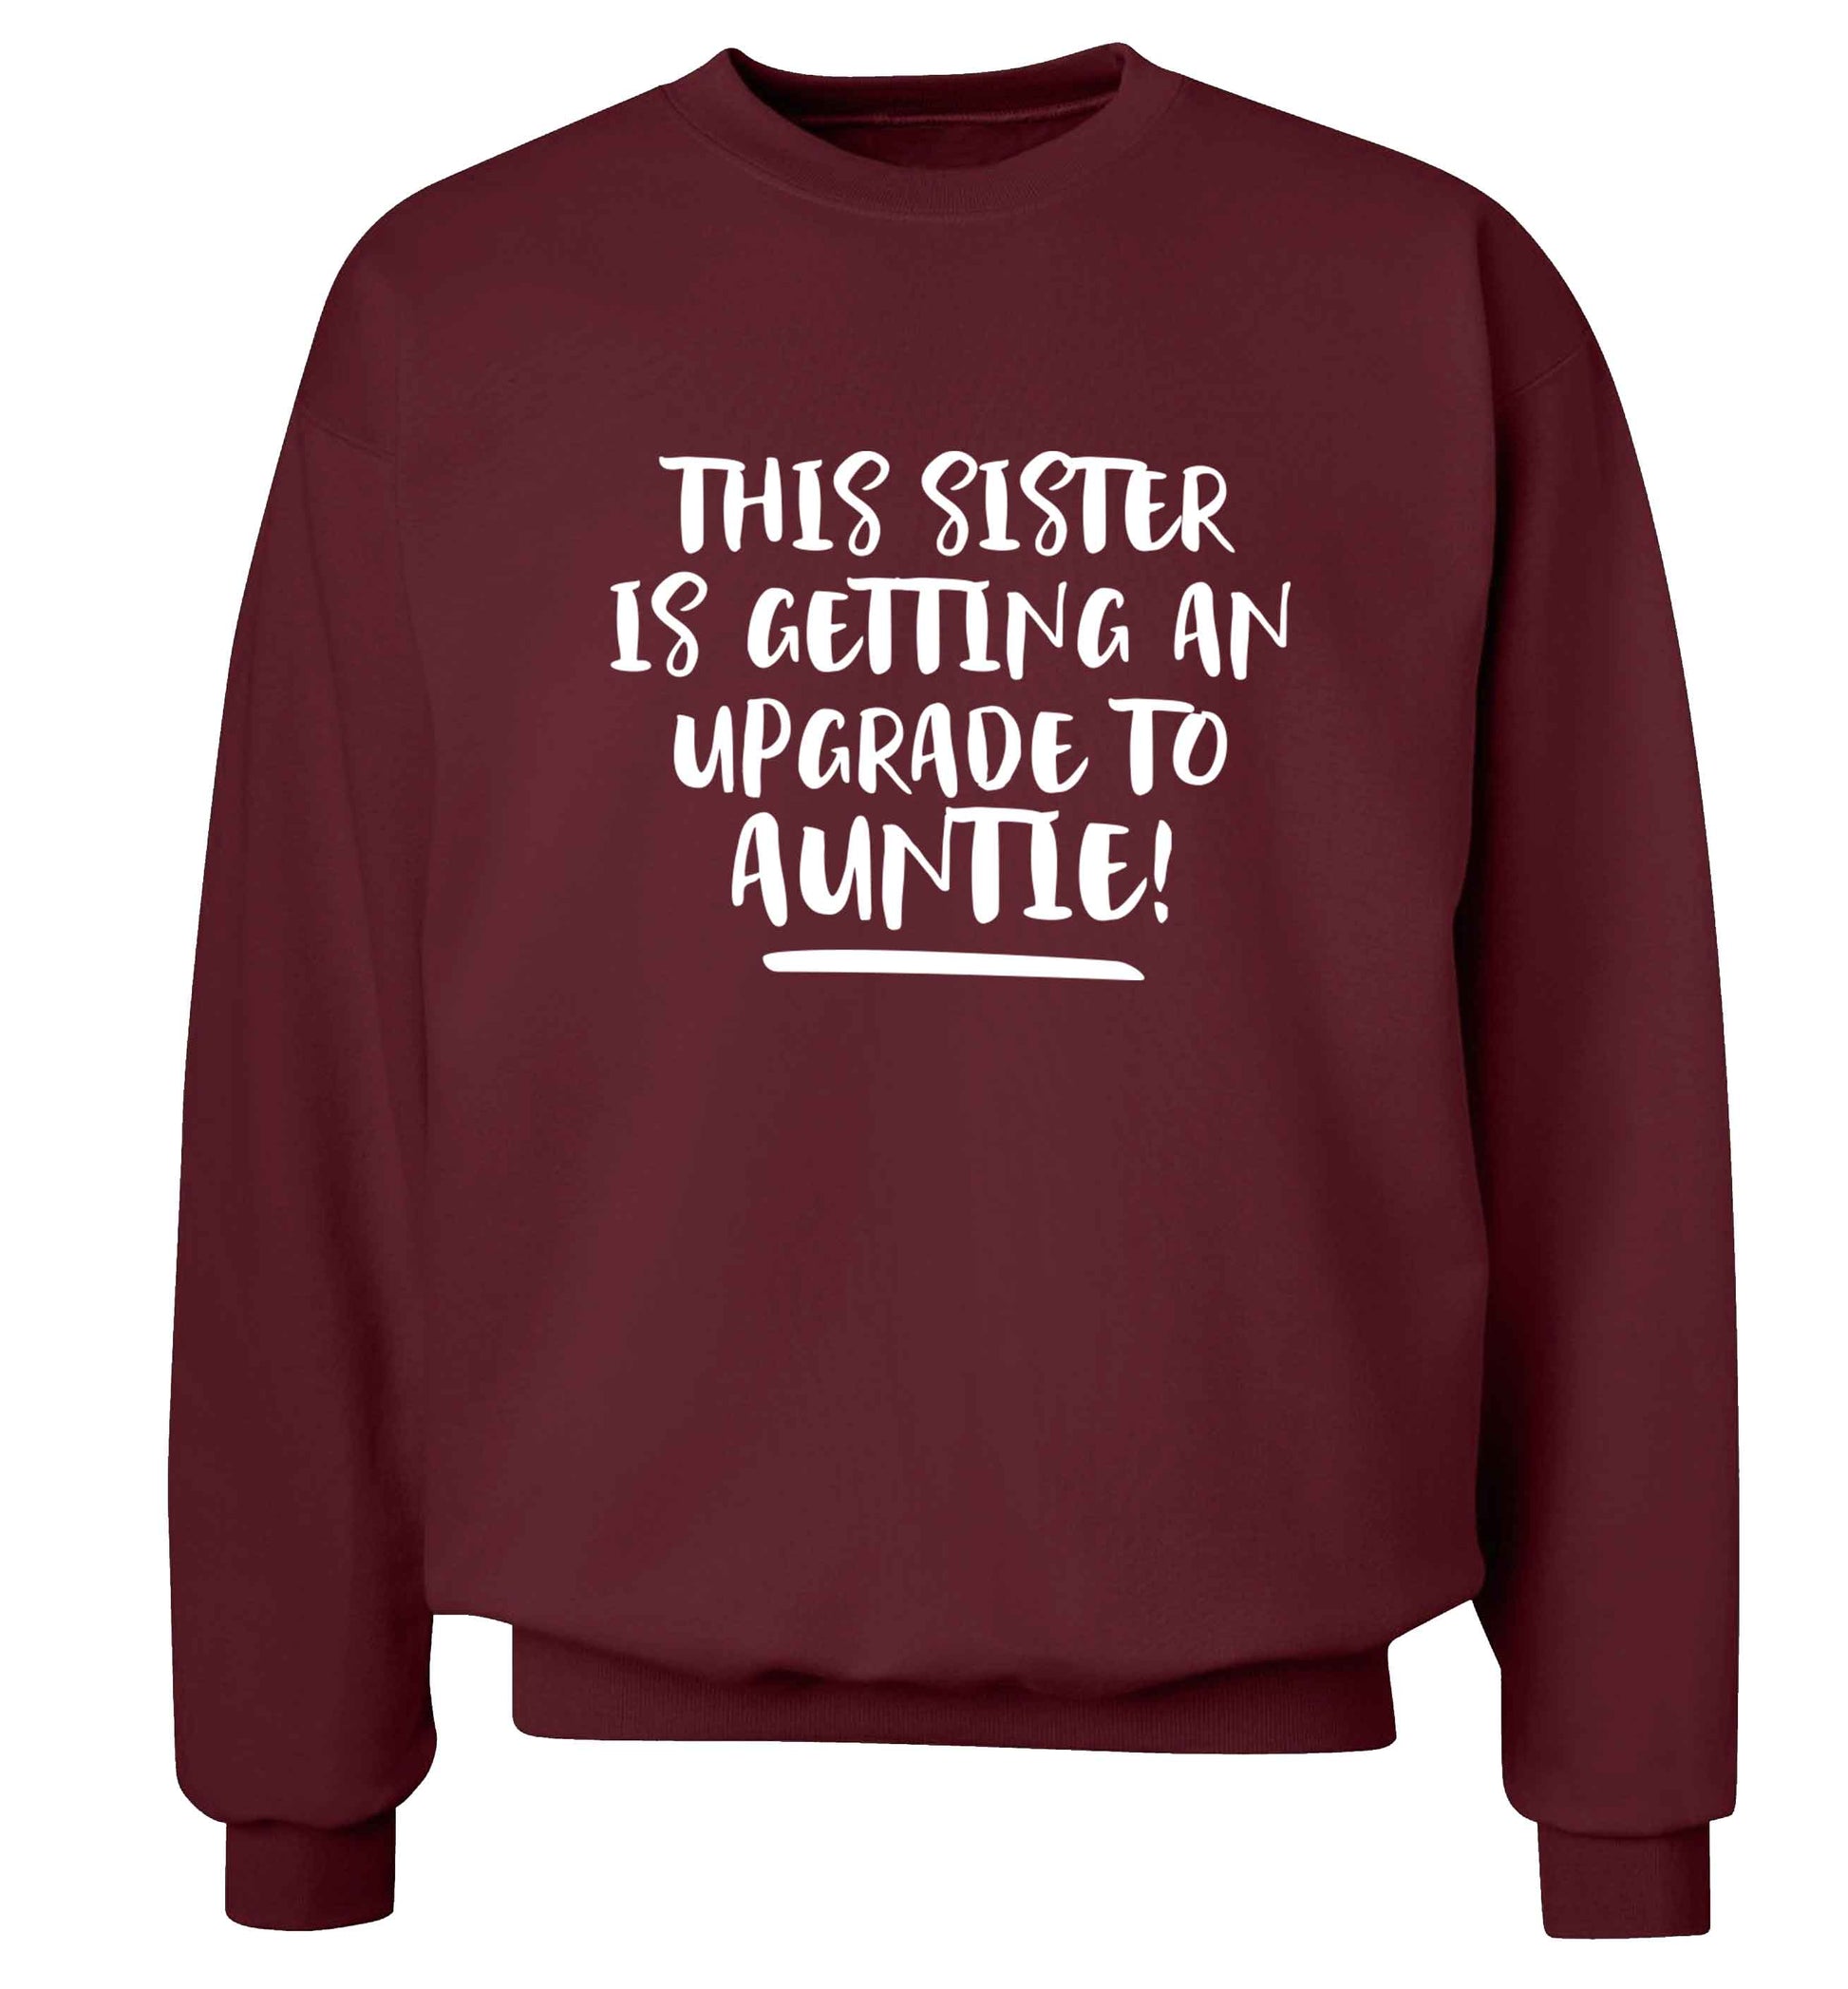 This sister is getting an upgrade to auntie! Adult's unisex maroon Sweater 2XL